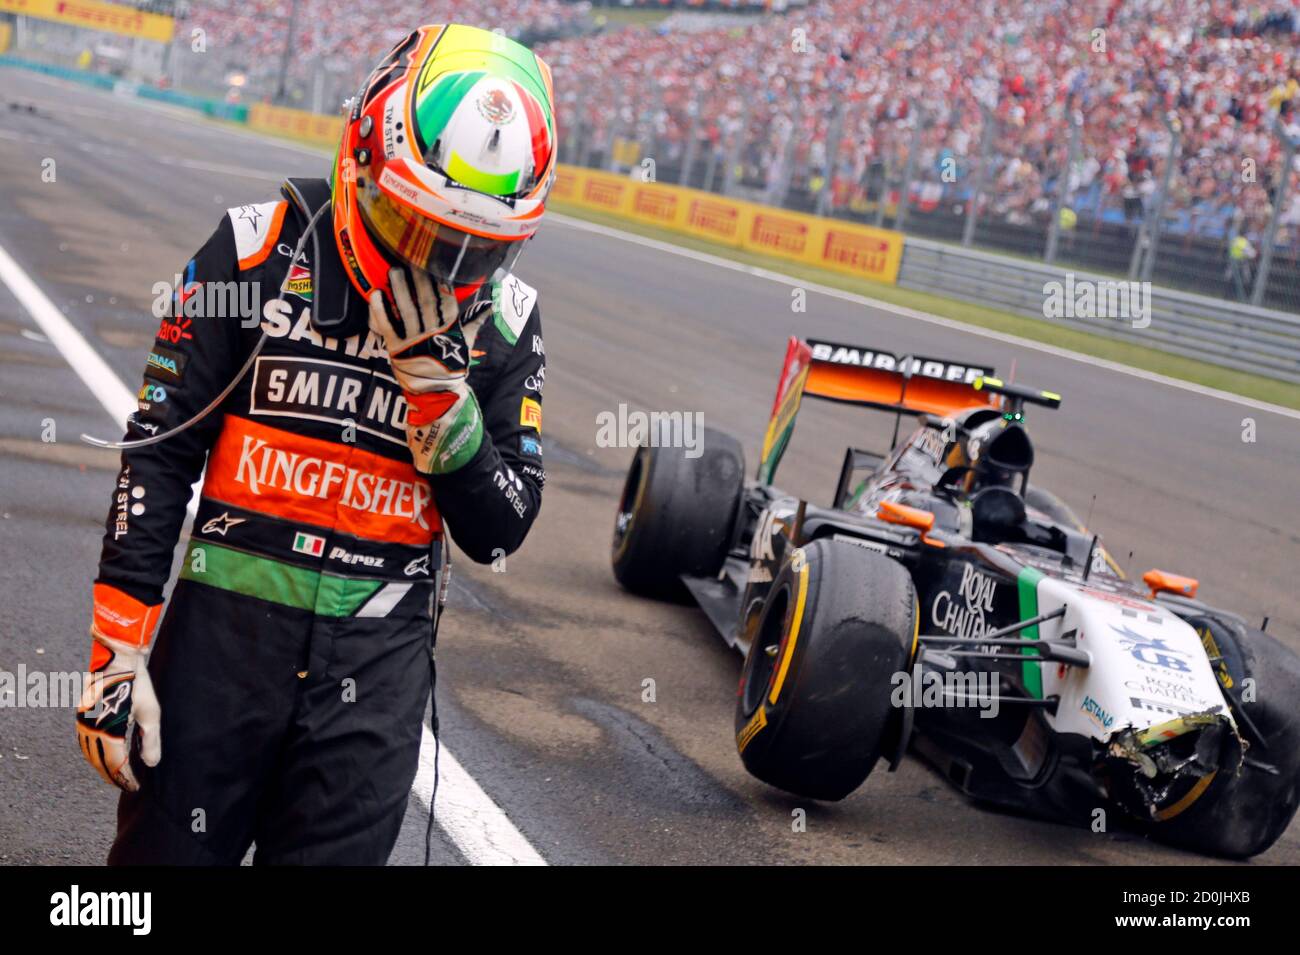 Force India Formula One driver Sergio Perez of Mexico reacts after a crash  during the Hungarian F1 Grand Prix at the Hungaroring circuit, near  Budapest July 27, 2014. REUTERS/Darko Bandic/Pool (HUNGARY -